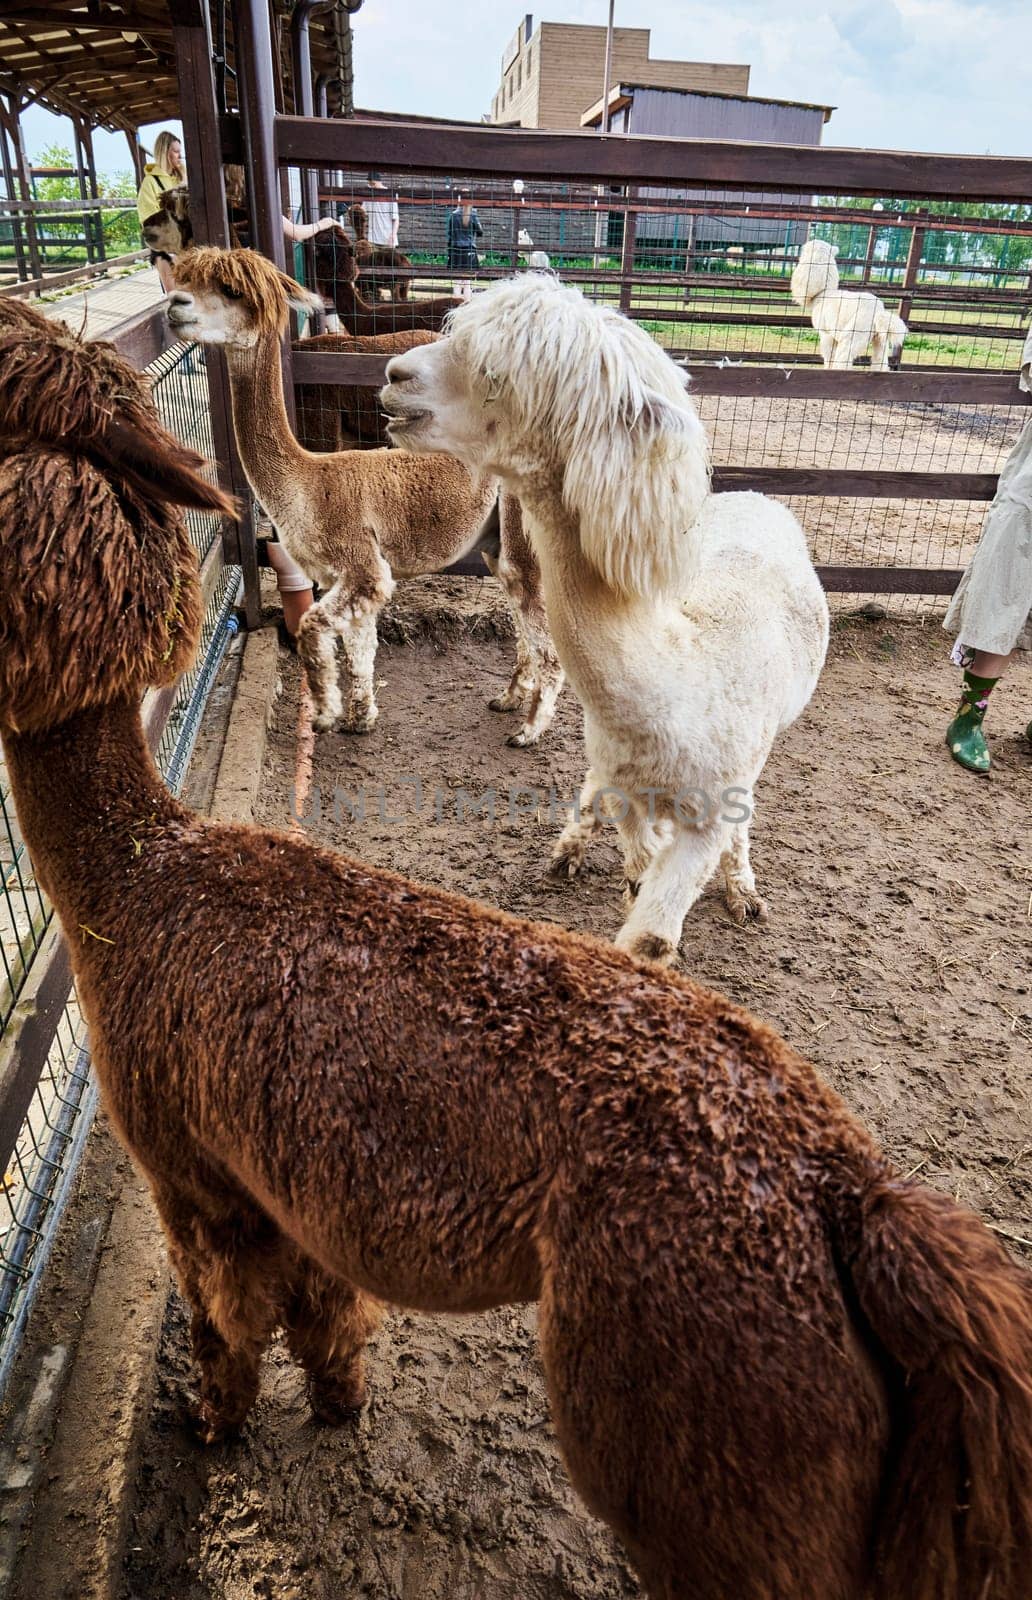 Hairy alpacas standing in a pen at the zoo by driver-s